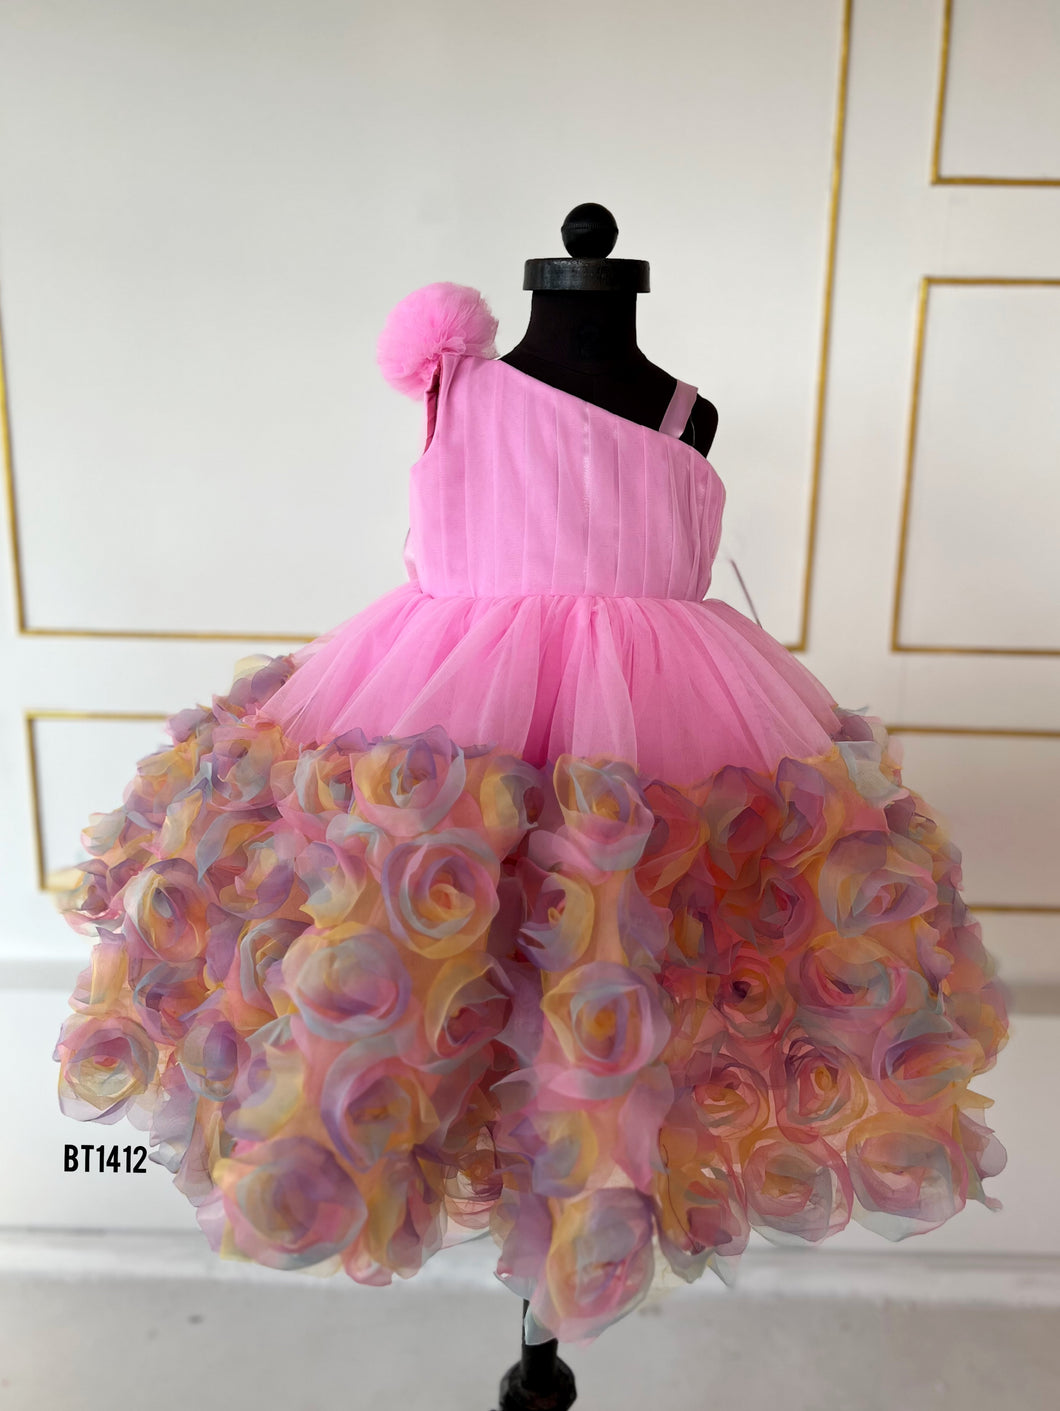 BT1412 Blossoming Blush – Baby's Blooming Party Frock